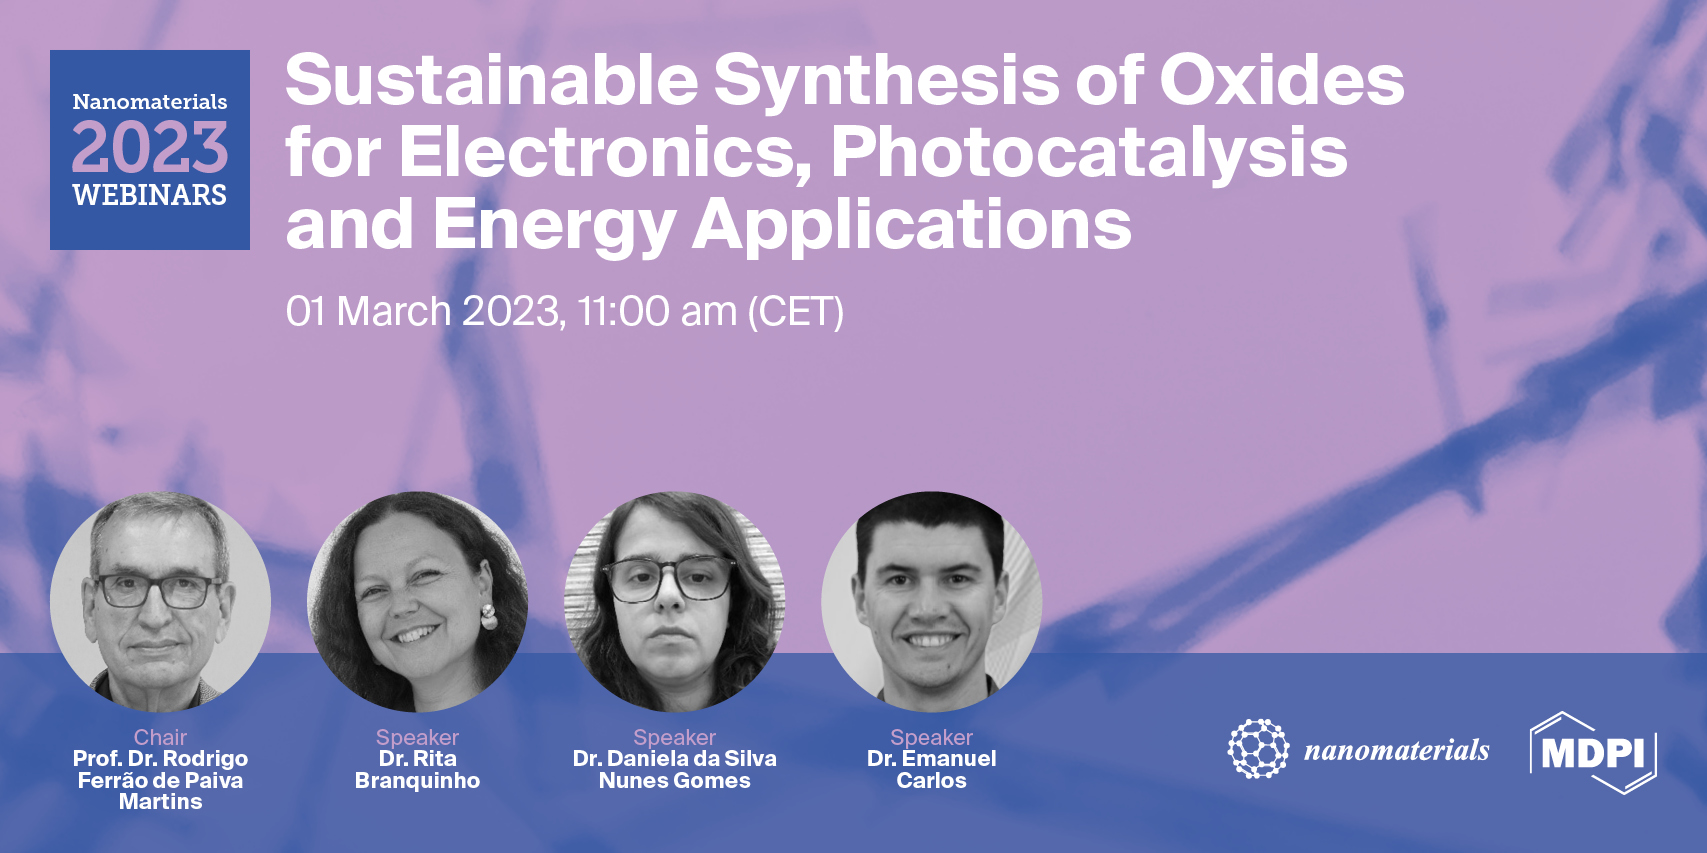 Nanomaterials Webinar | Sustainable Synthesis of Oxides for Electronics, Photocatalysis, and Energy Applications